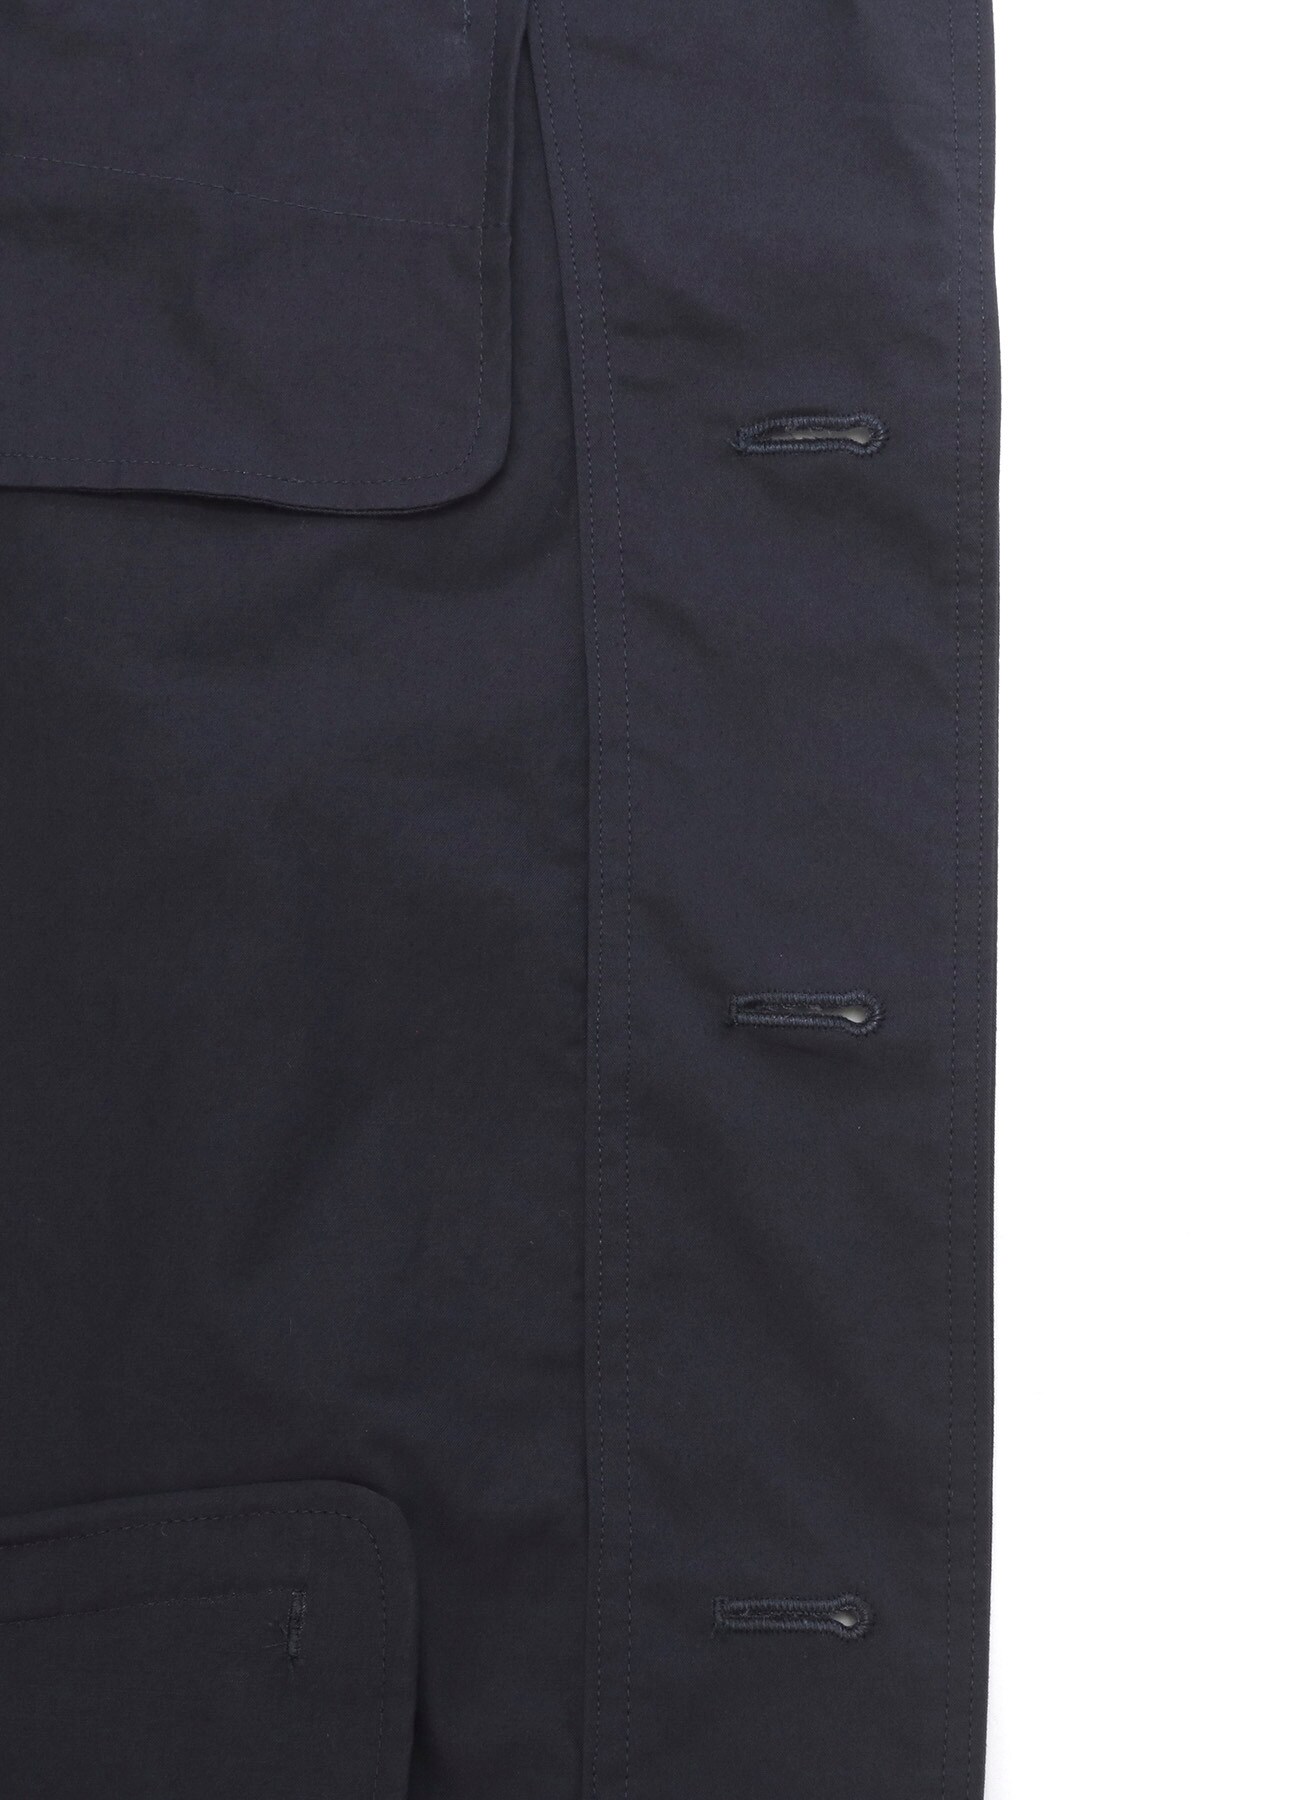 Cotton Twill 3BS Tailored Shirt Jacket (S Navy): S'YTE ｜ THE SHOP 